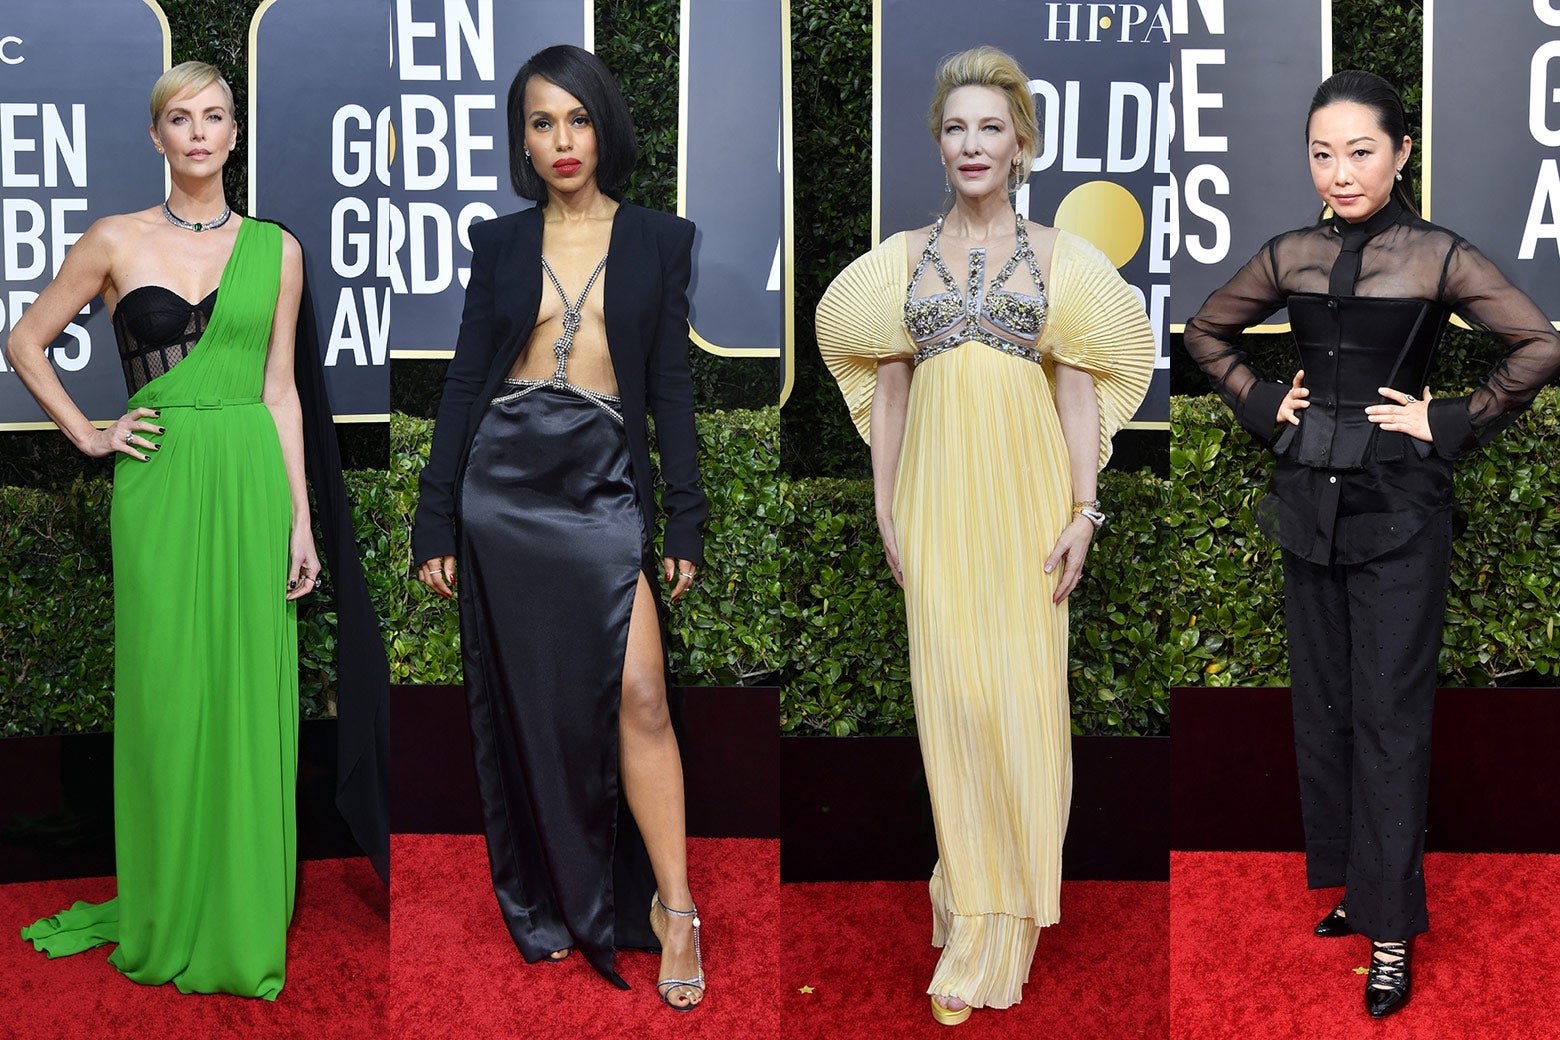 Charlize Theron, Kerry Washington, Cate Blanchett, and Lulu Wang pose at the 2020 Golden Globes red carpet.